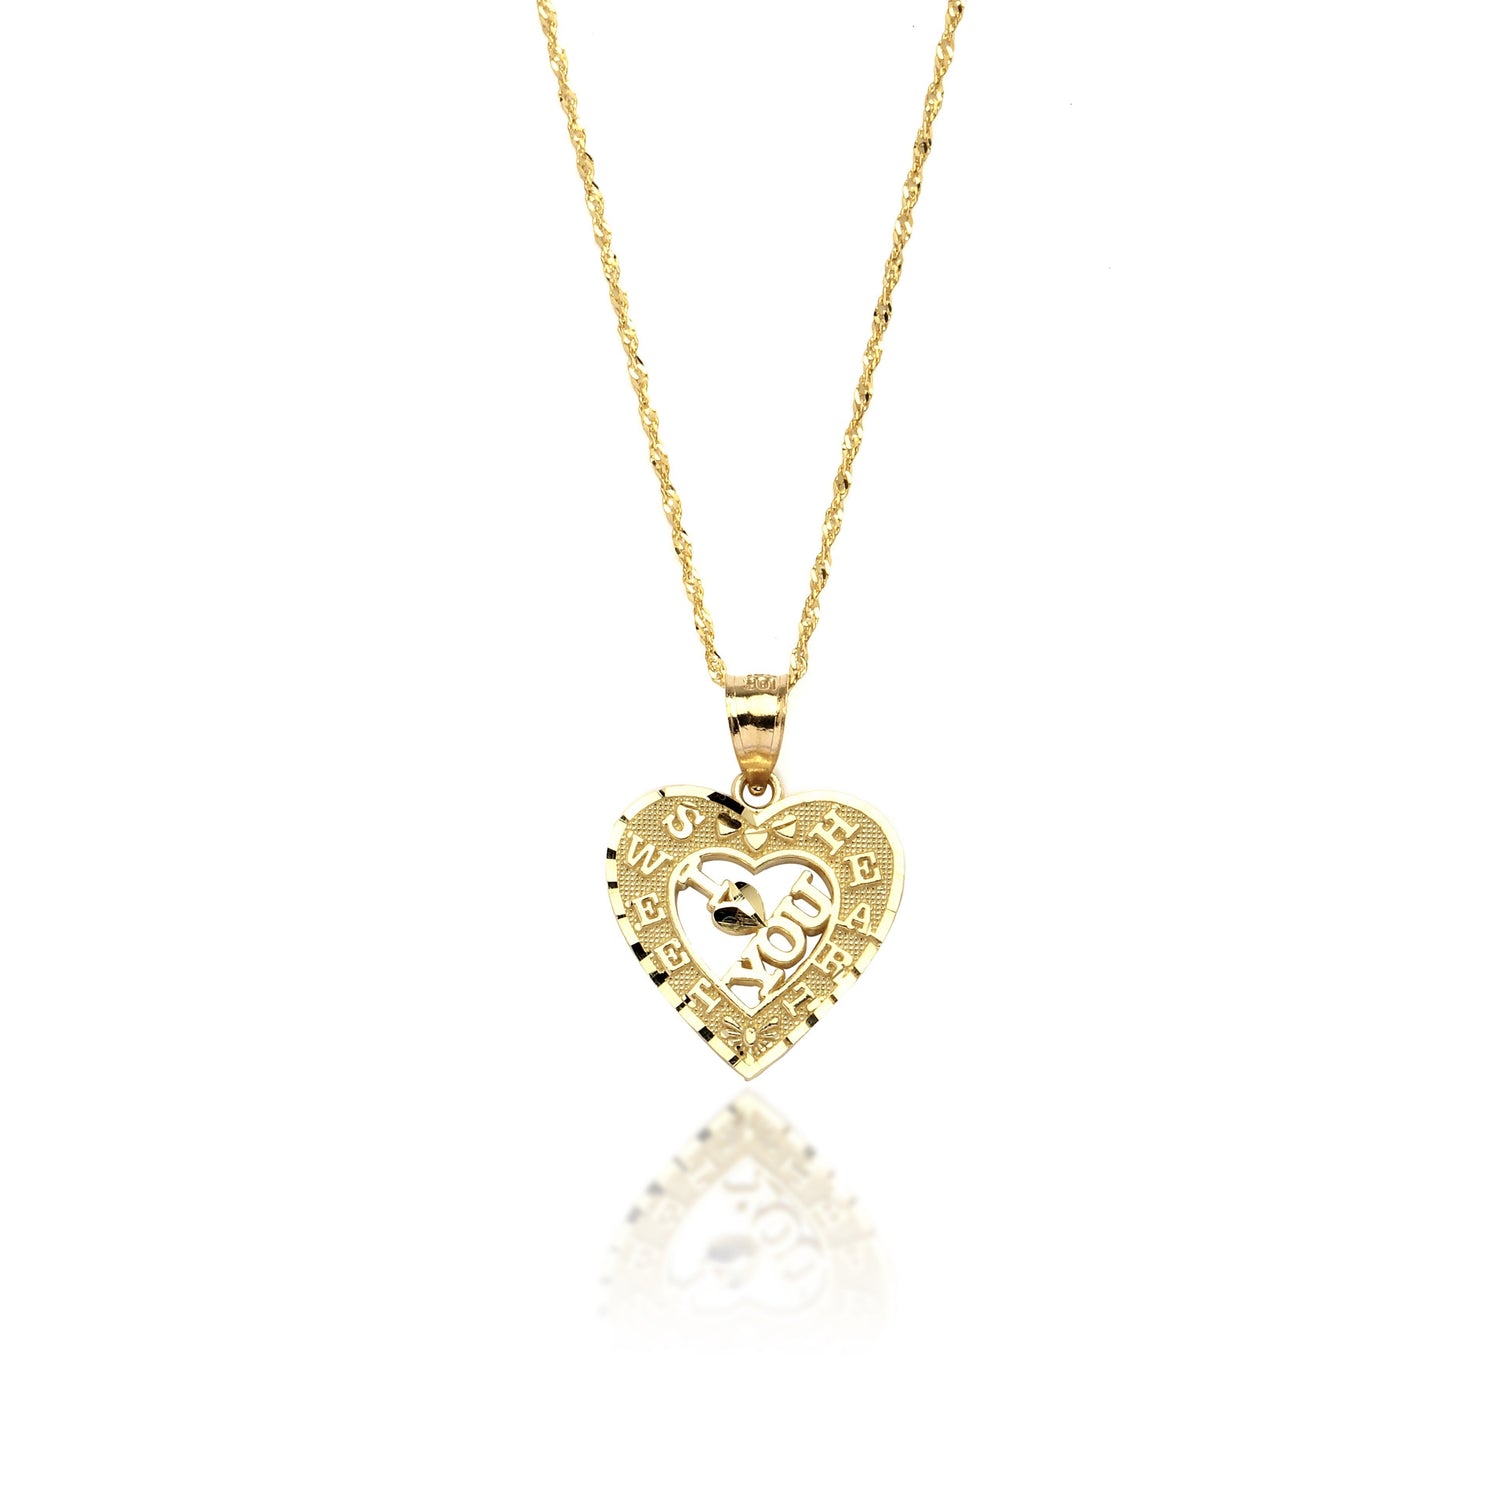 10k Yellow Gold I Love You Sweetheart Heart Pendant Necklace for Women and Girls